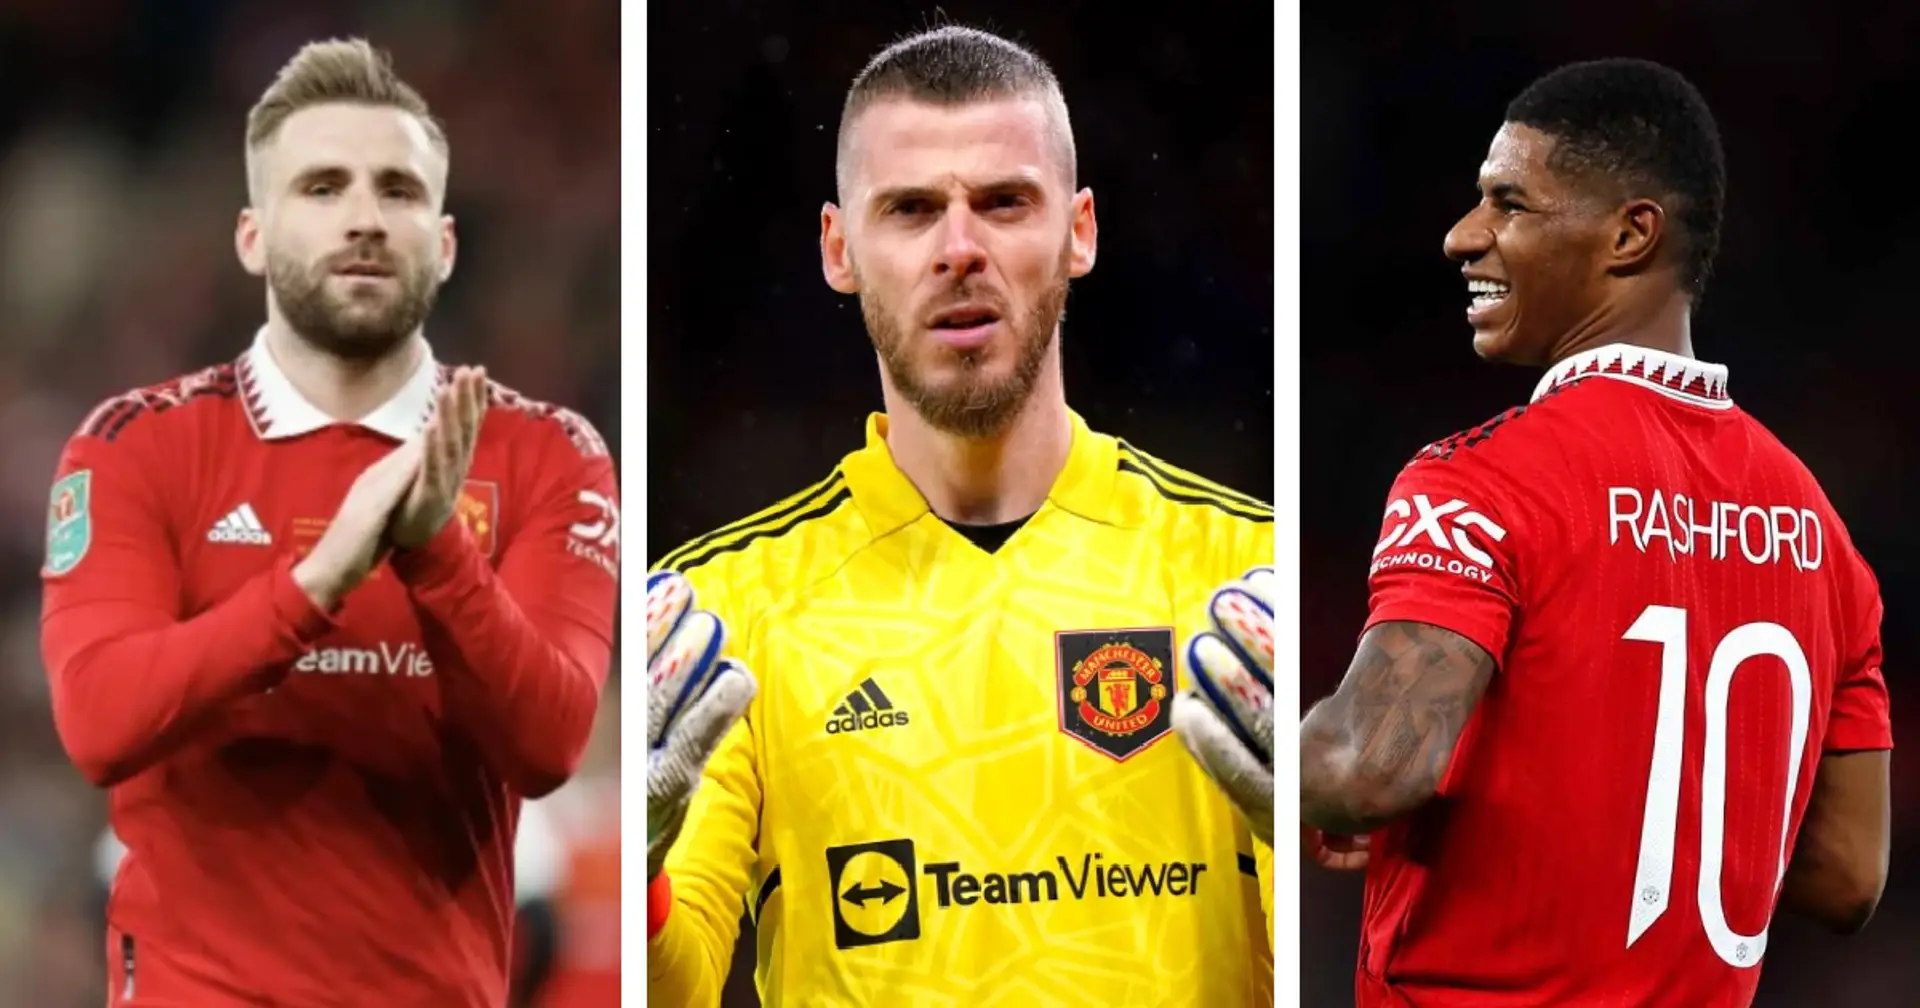 Ten Hag issues updates on Rashford, De Gea and Shaw's contract situation 